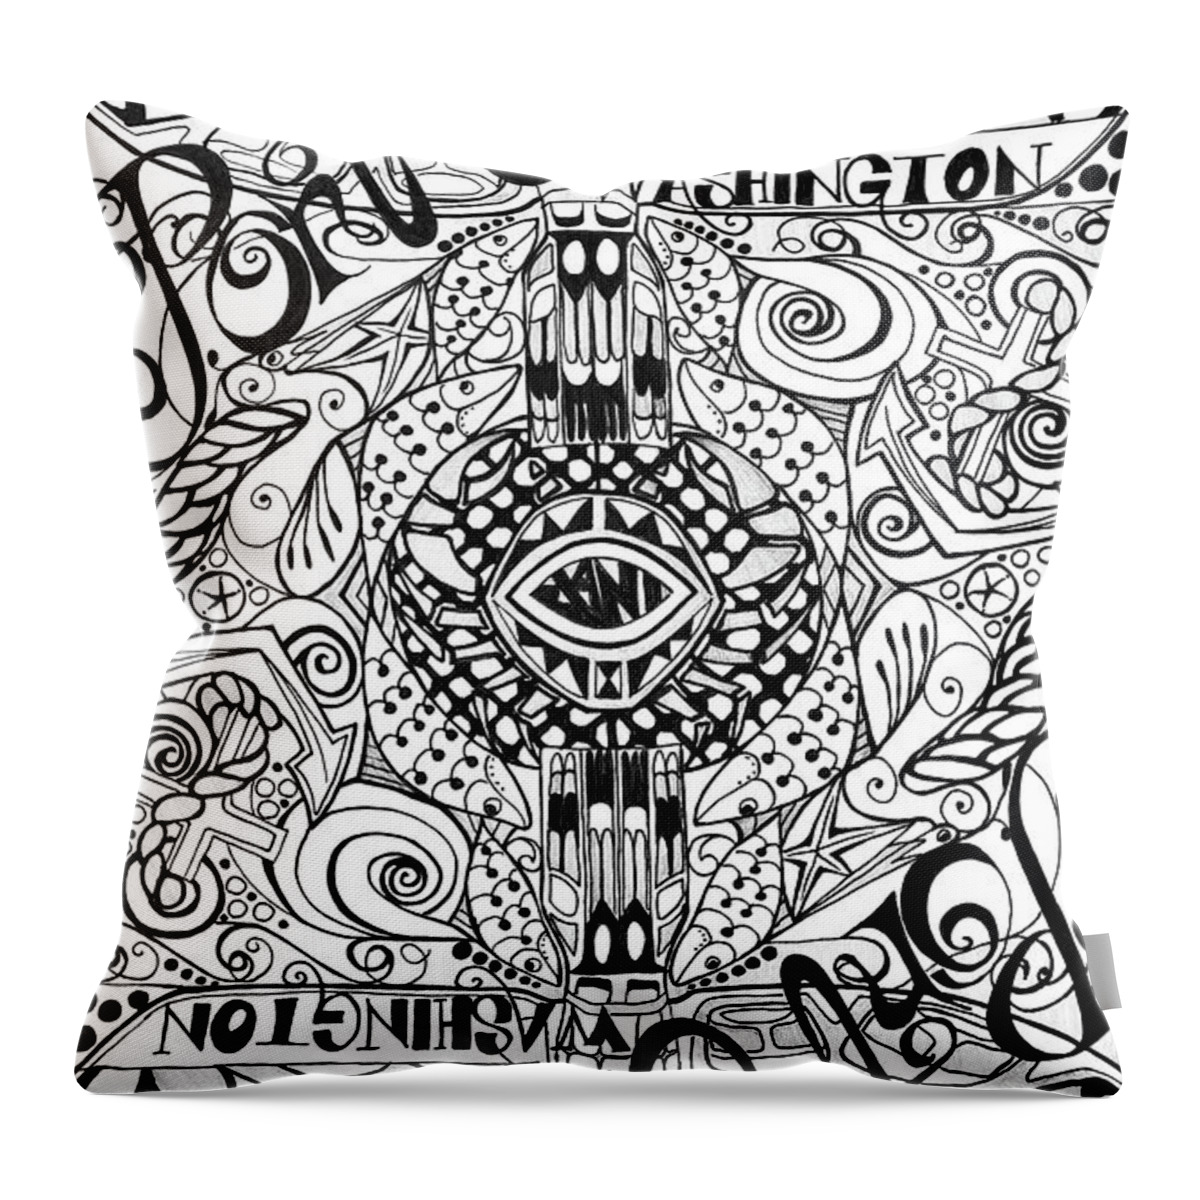 Port Orchard Throw Pillow featuring the drawing Port Orchard Washington Zentangle Collage by Jani Freimann